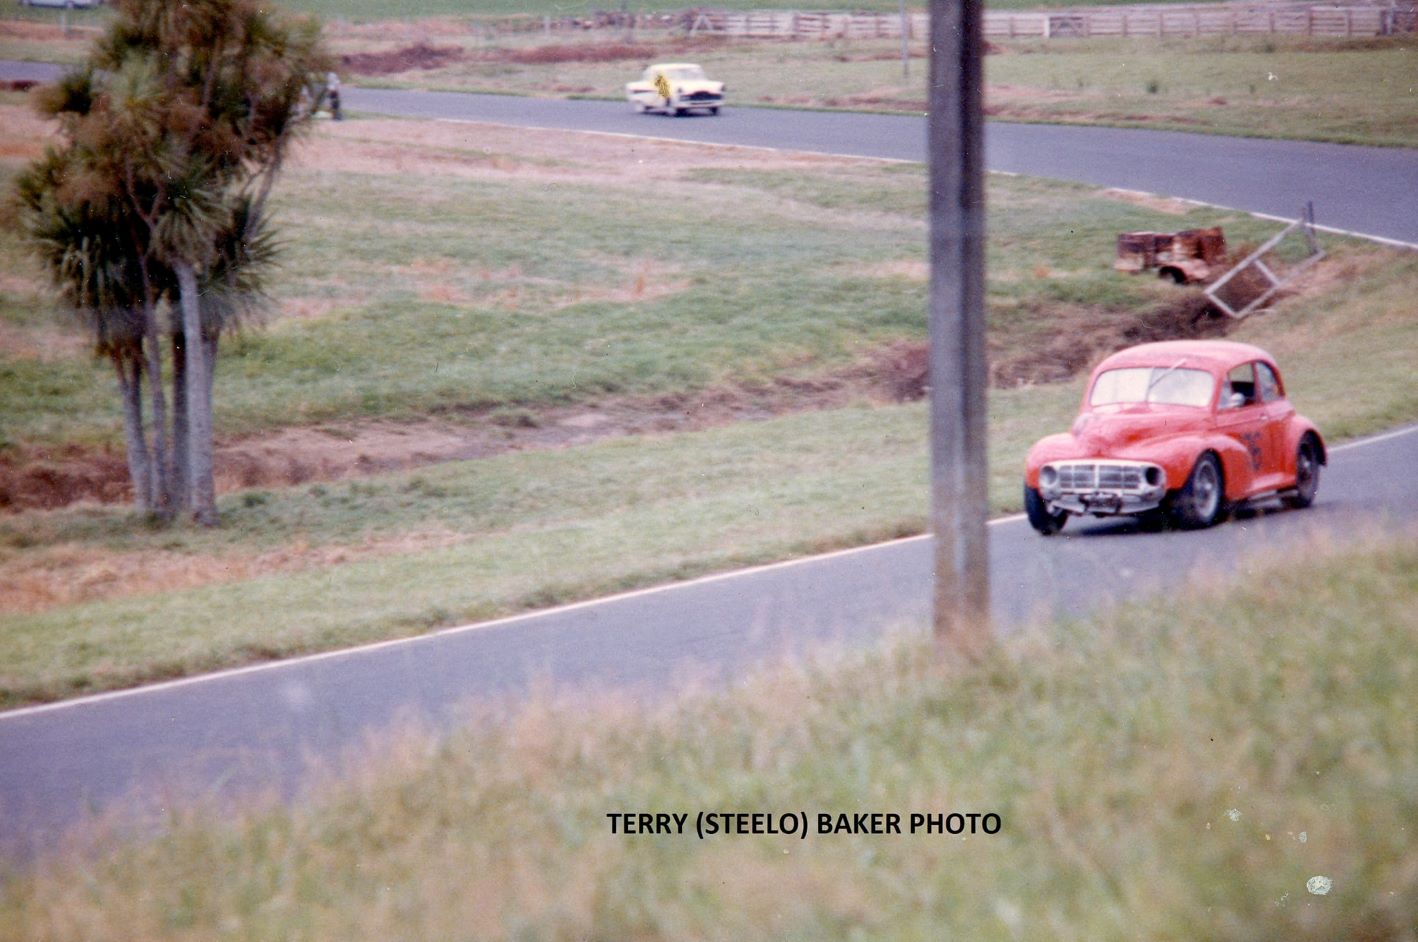 Name:  Pukekohe 1965 #039 Morrari coming over Rothmans 1965 NZGP 180kb arch J L Lawton photo Terry Stee.jpg
Views: 46
Size:  180.0 KB